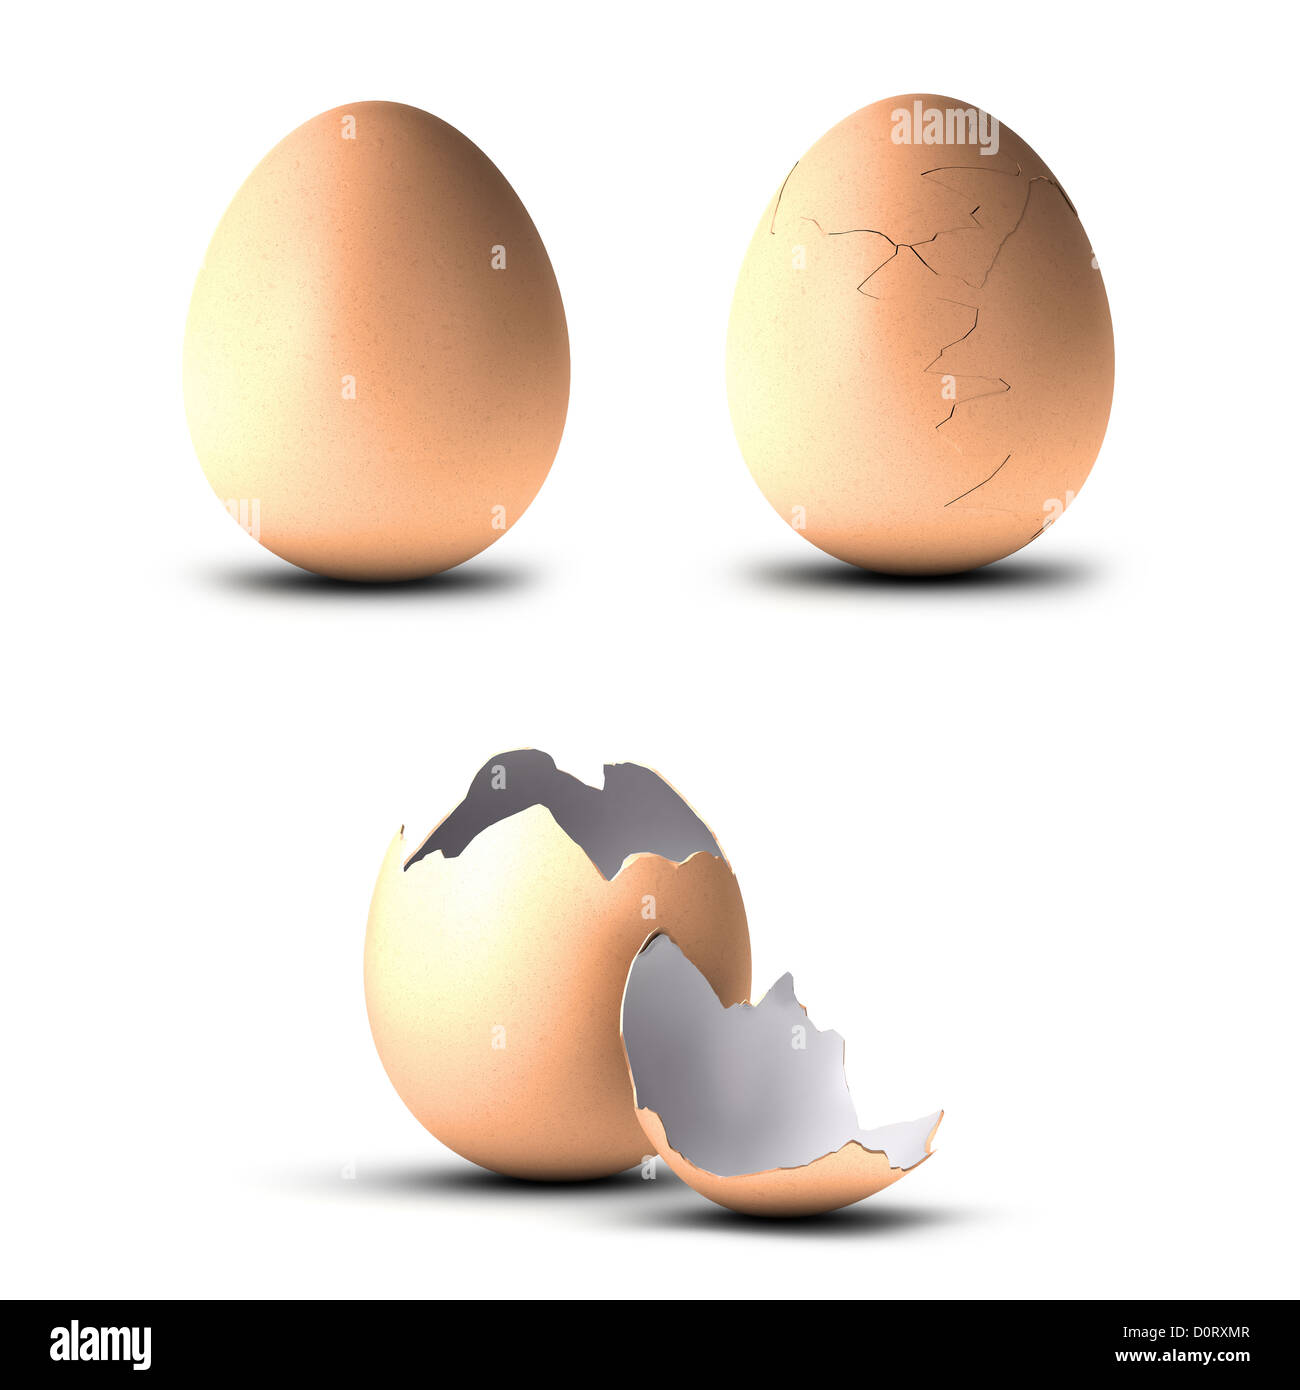 three eggs, one entire, another cracked and the last one open, illustration over white background Stock Photo